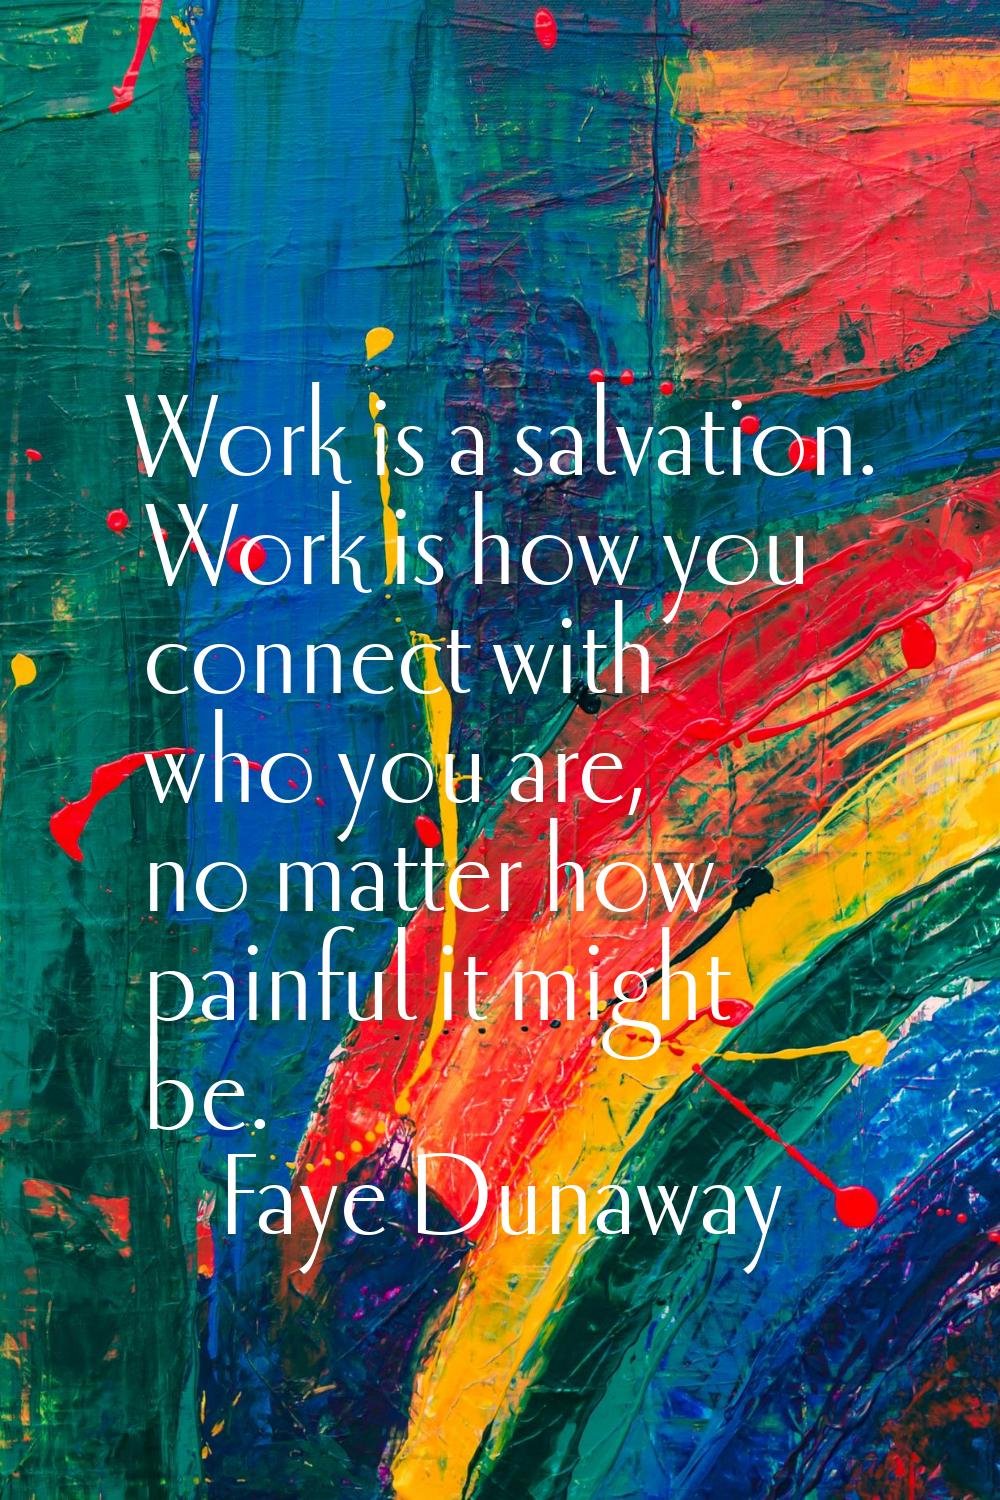 Work is a salvation. Work is how you connect with who you are, no matter how painful it might be.